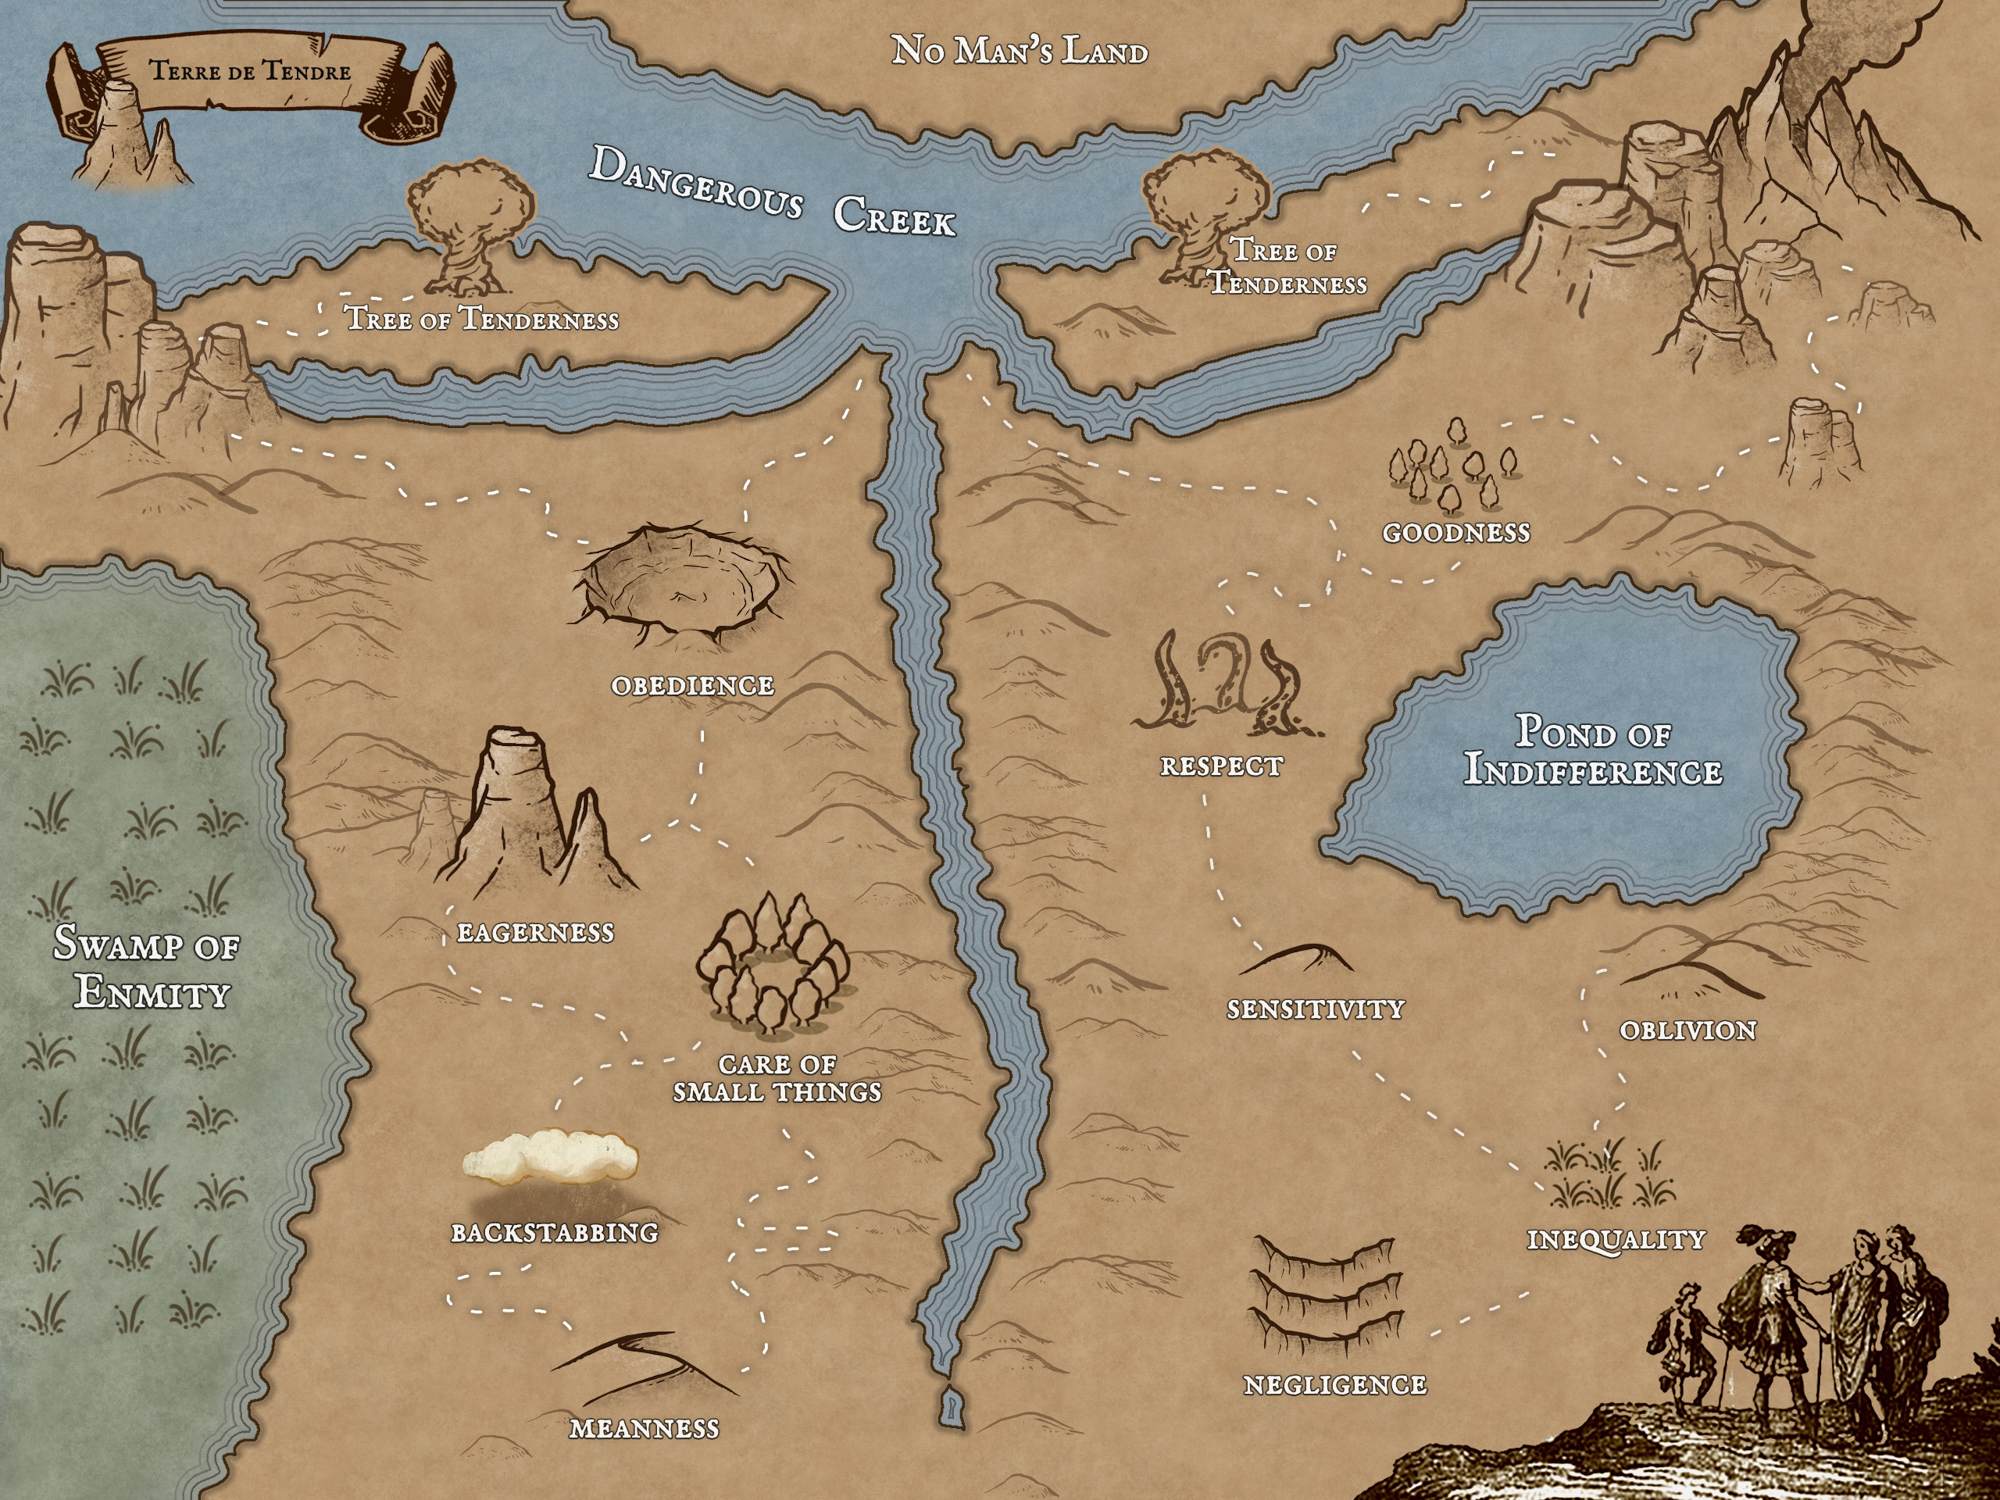 A simplified map of the imaginary land Terre de Tendre, rendered in an old-fashioned style.